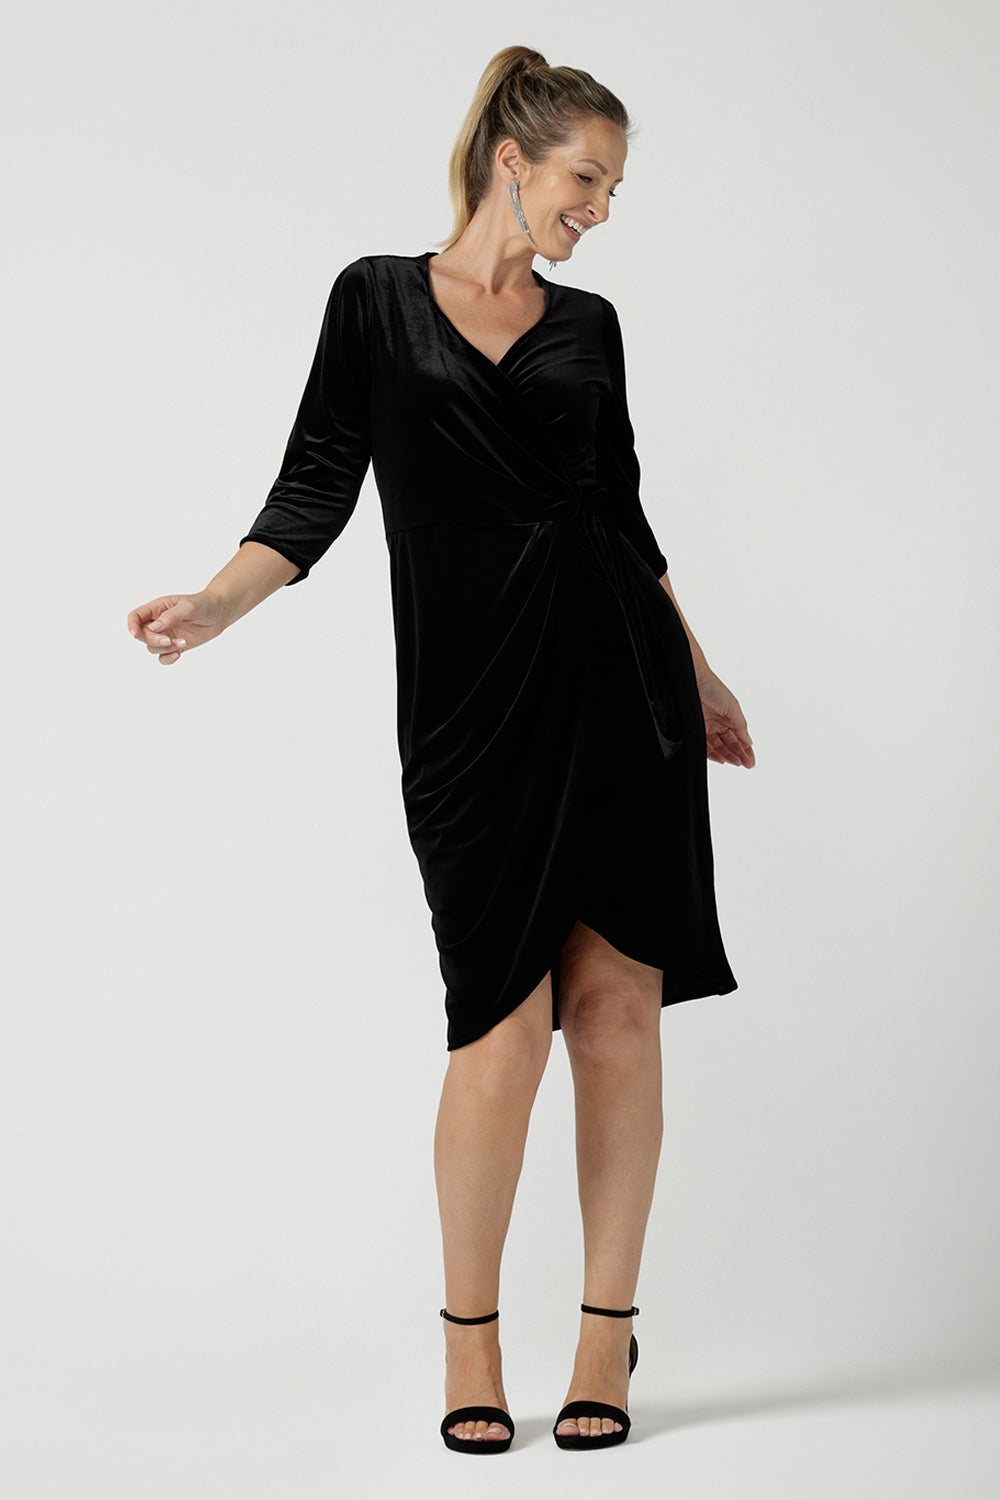 Size 10 model wears the Hedy dress in Black. A velour functioning wrap dress with a tulip skirt and draped front. Up Late evening wear for event dressing. Size inclusive sustainable fashion made in Australia size 8 - 24.